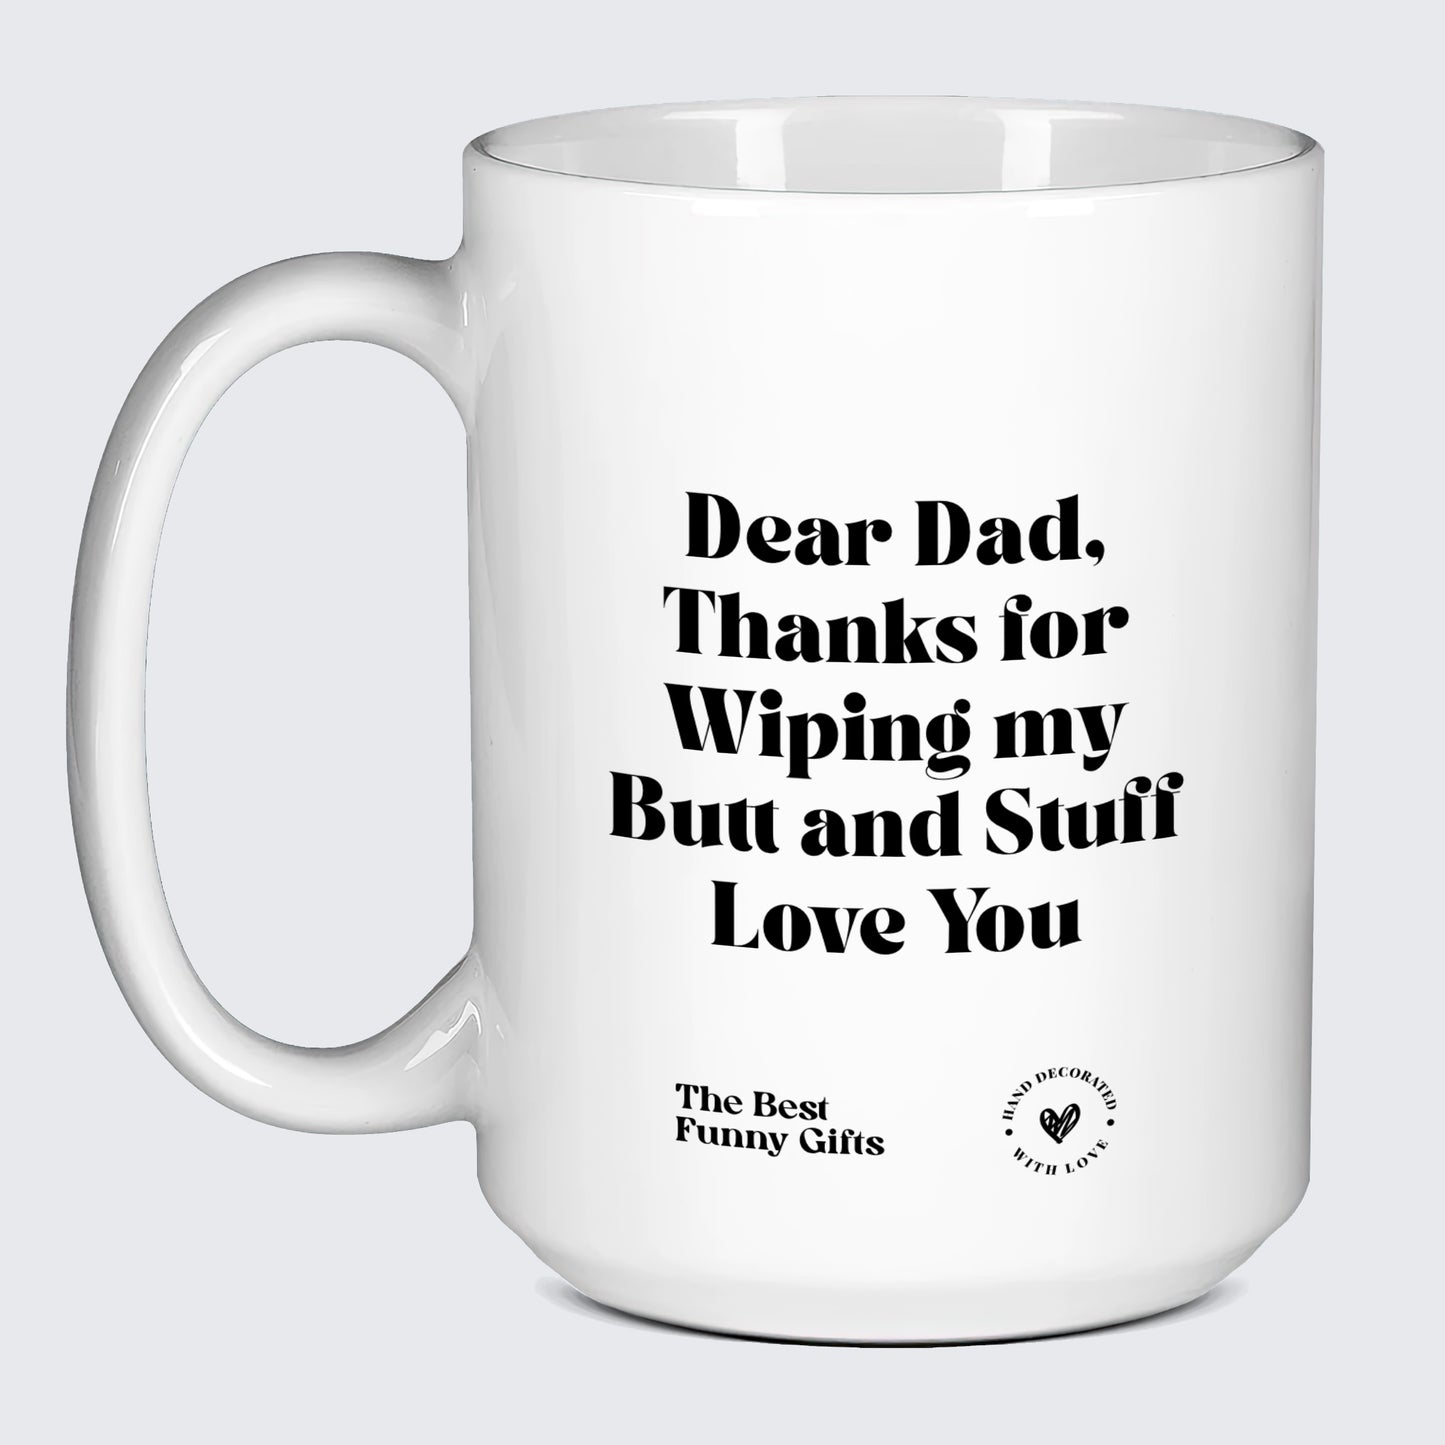 Funny Gift for Dad Dear Dad, Thanks for Wiping My Butt and Stuff Love You - The Best Funny Gifts